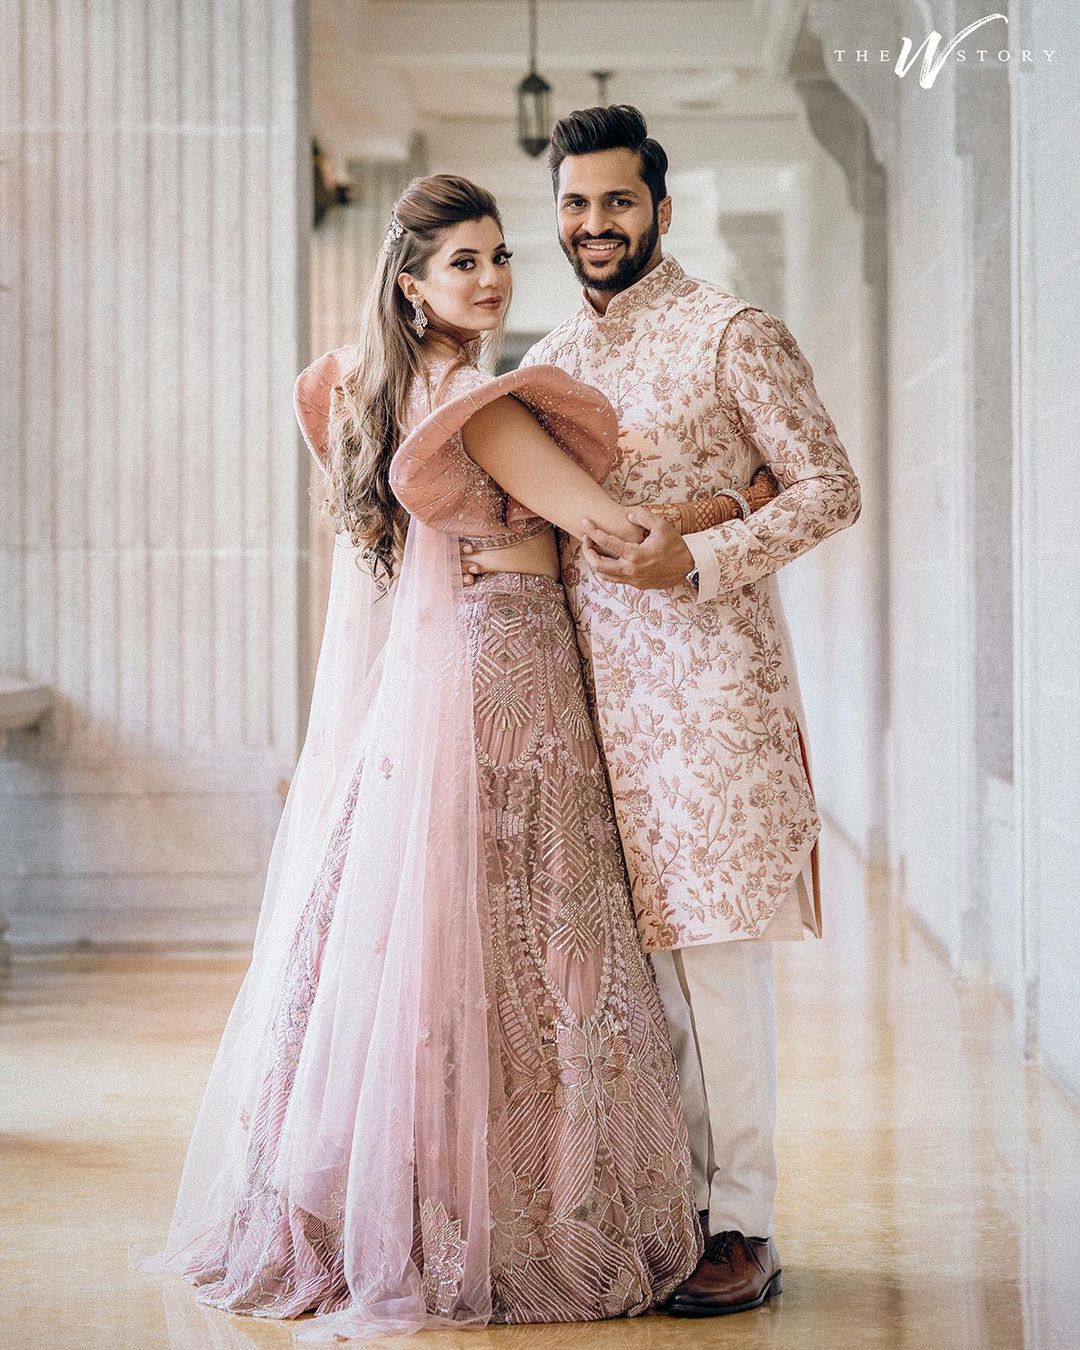 Blush Pink Lehenga and Coordinating Engagement Dress for Bride and Groom 